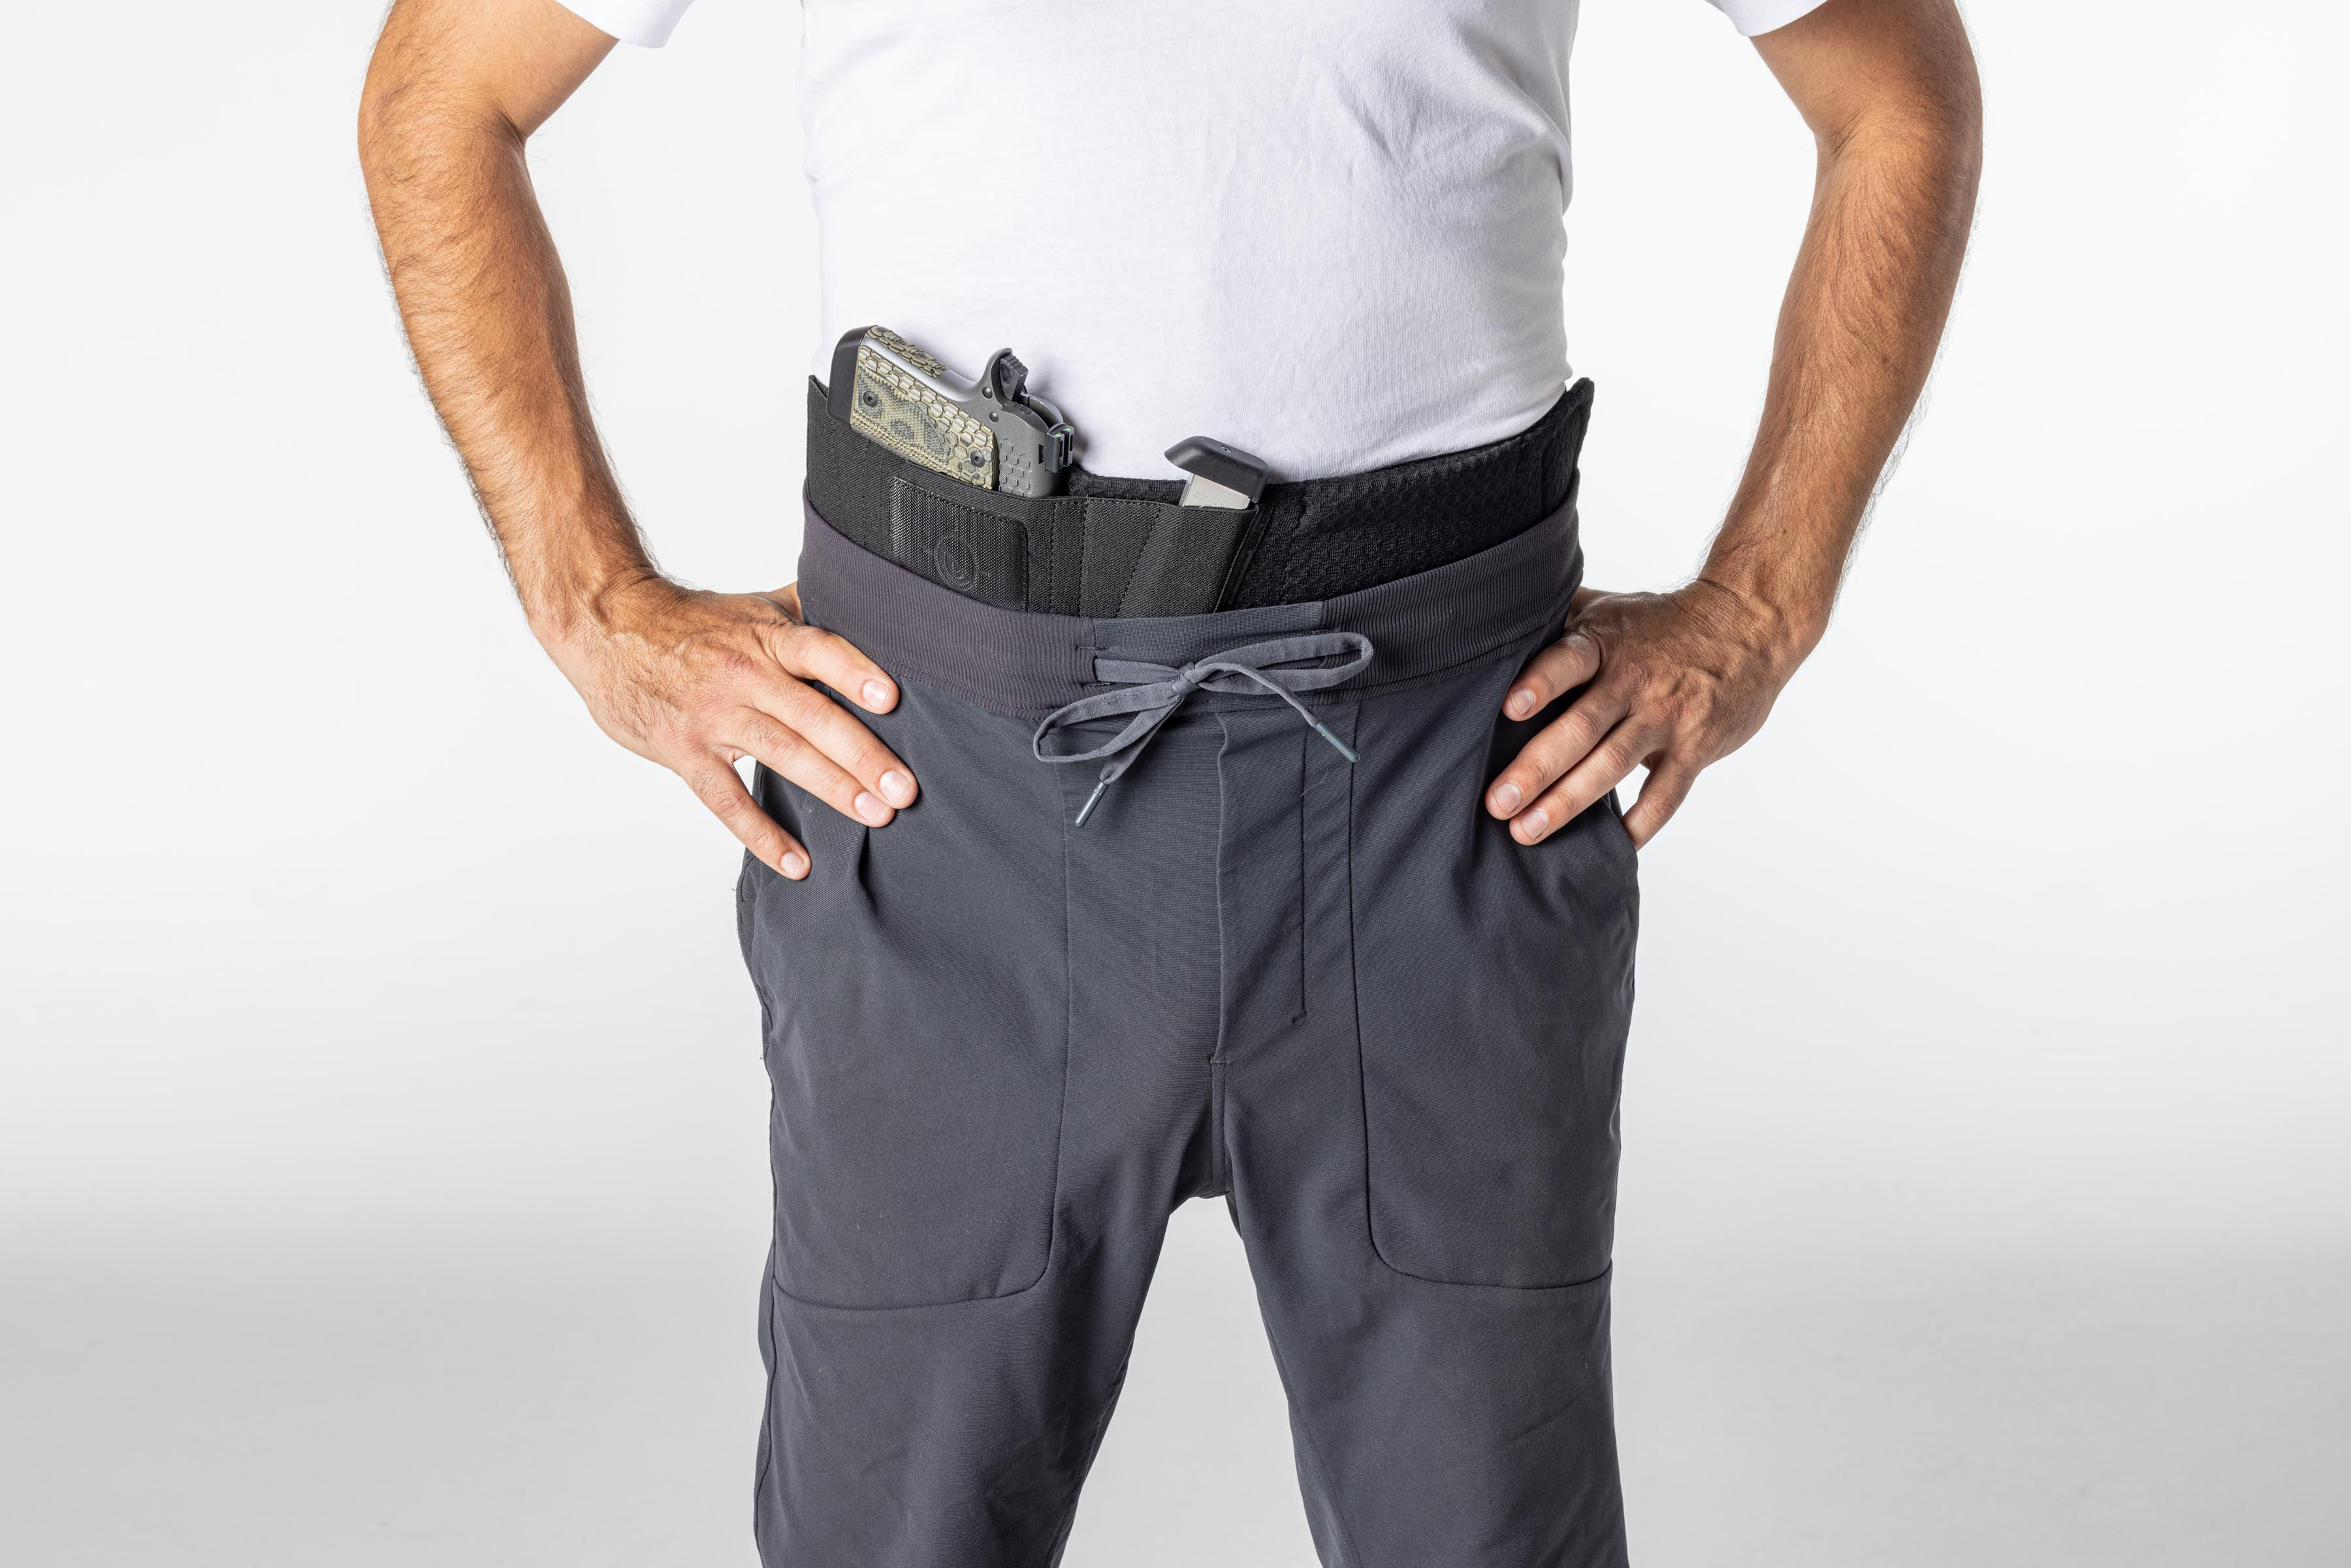 GoZier Tactical Belly Band Holsters for Concealed Carry